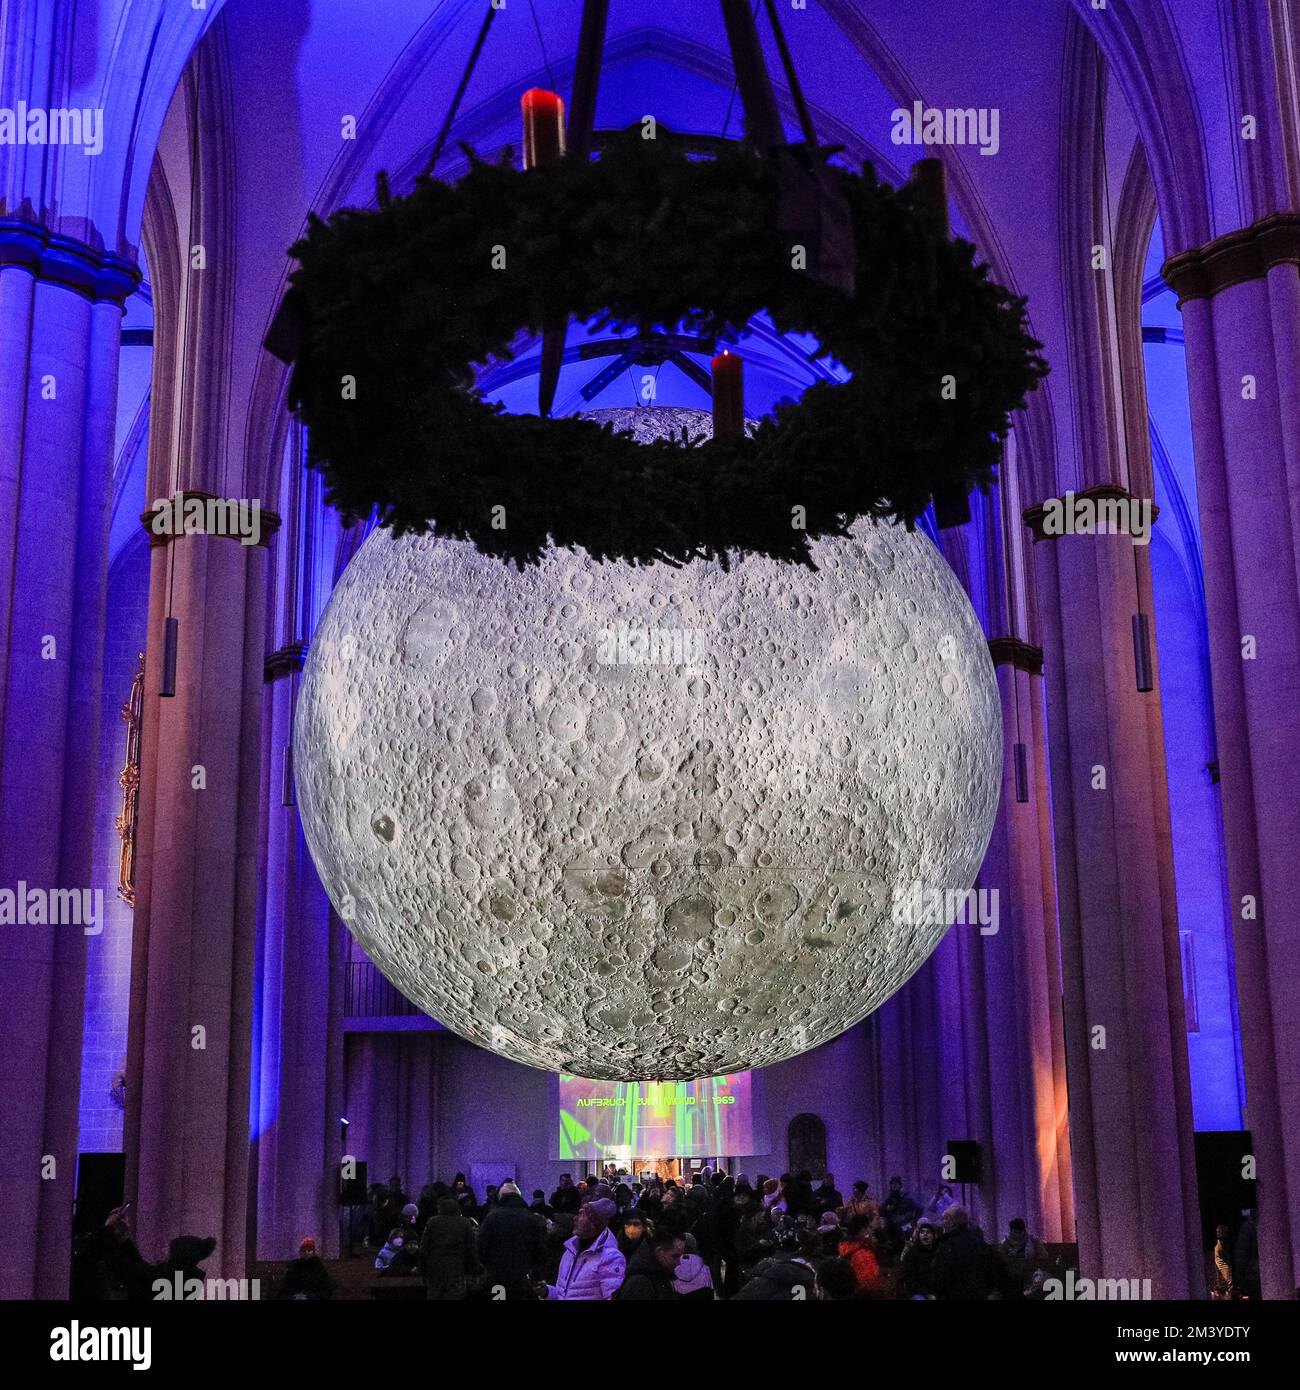 Münster, Germany. 17th Dec, 2022. A Christmas wreath hangs parallel to the installation, making it look like a halo from some angles. People visit the 7-metre diameter illuminated 'Museum of the Moon' installation by British artist Luke Jerram at Überwasserkirche, a gothic church in the centre of Münster's old town. Queues have formed outside the church and the installation clearly proves popular with the many visitors to the historic town. Credit: Imageplotter/Alamy Live News Stock Photo